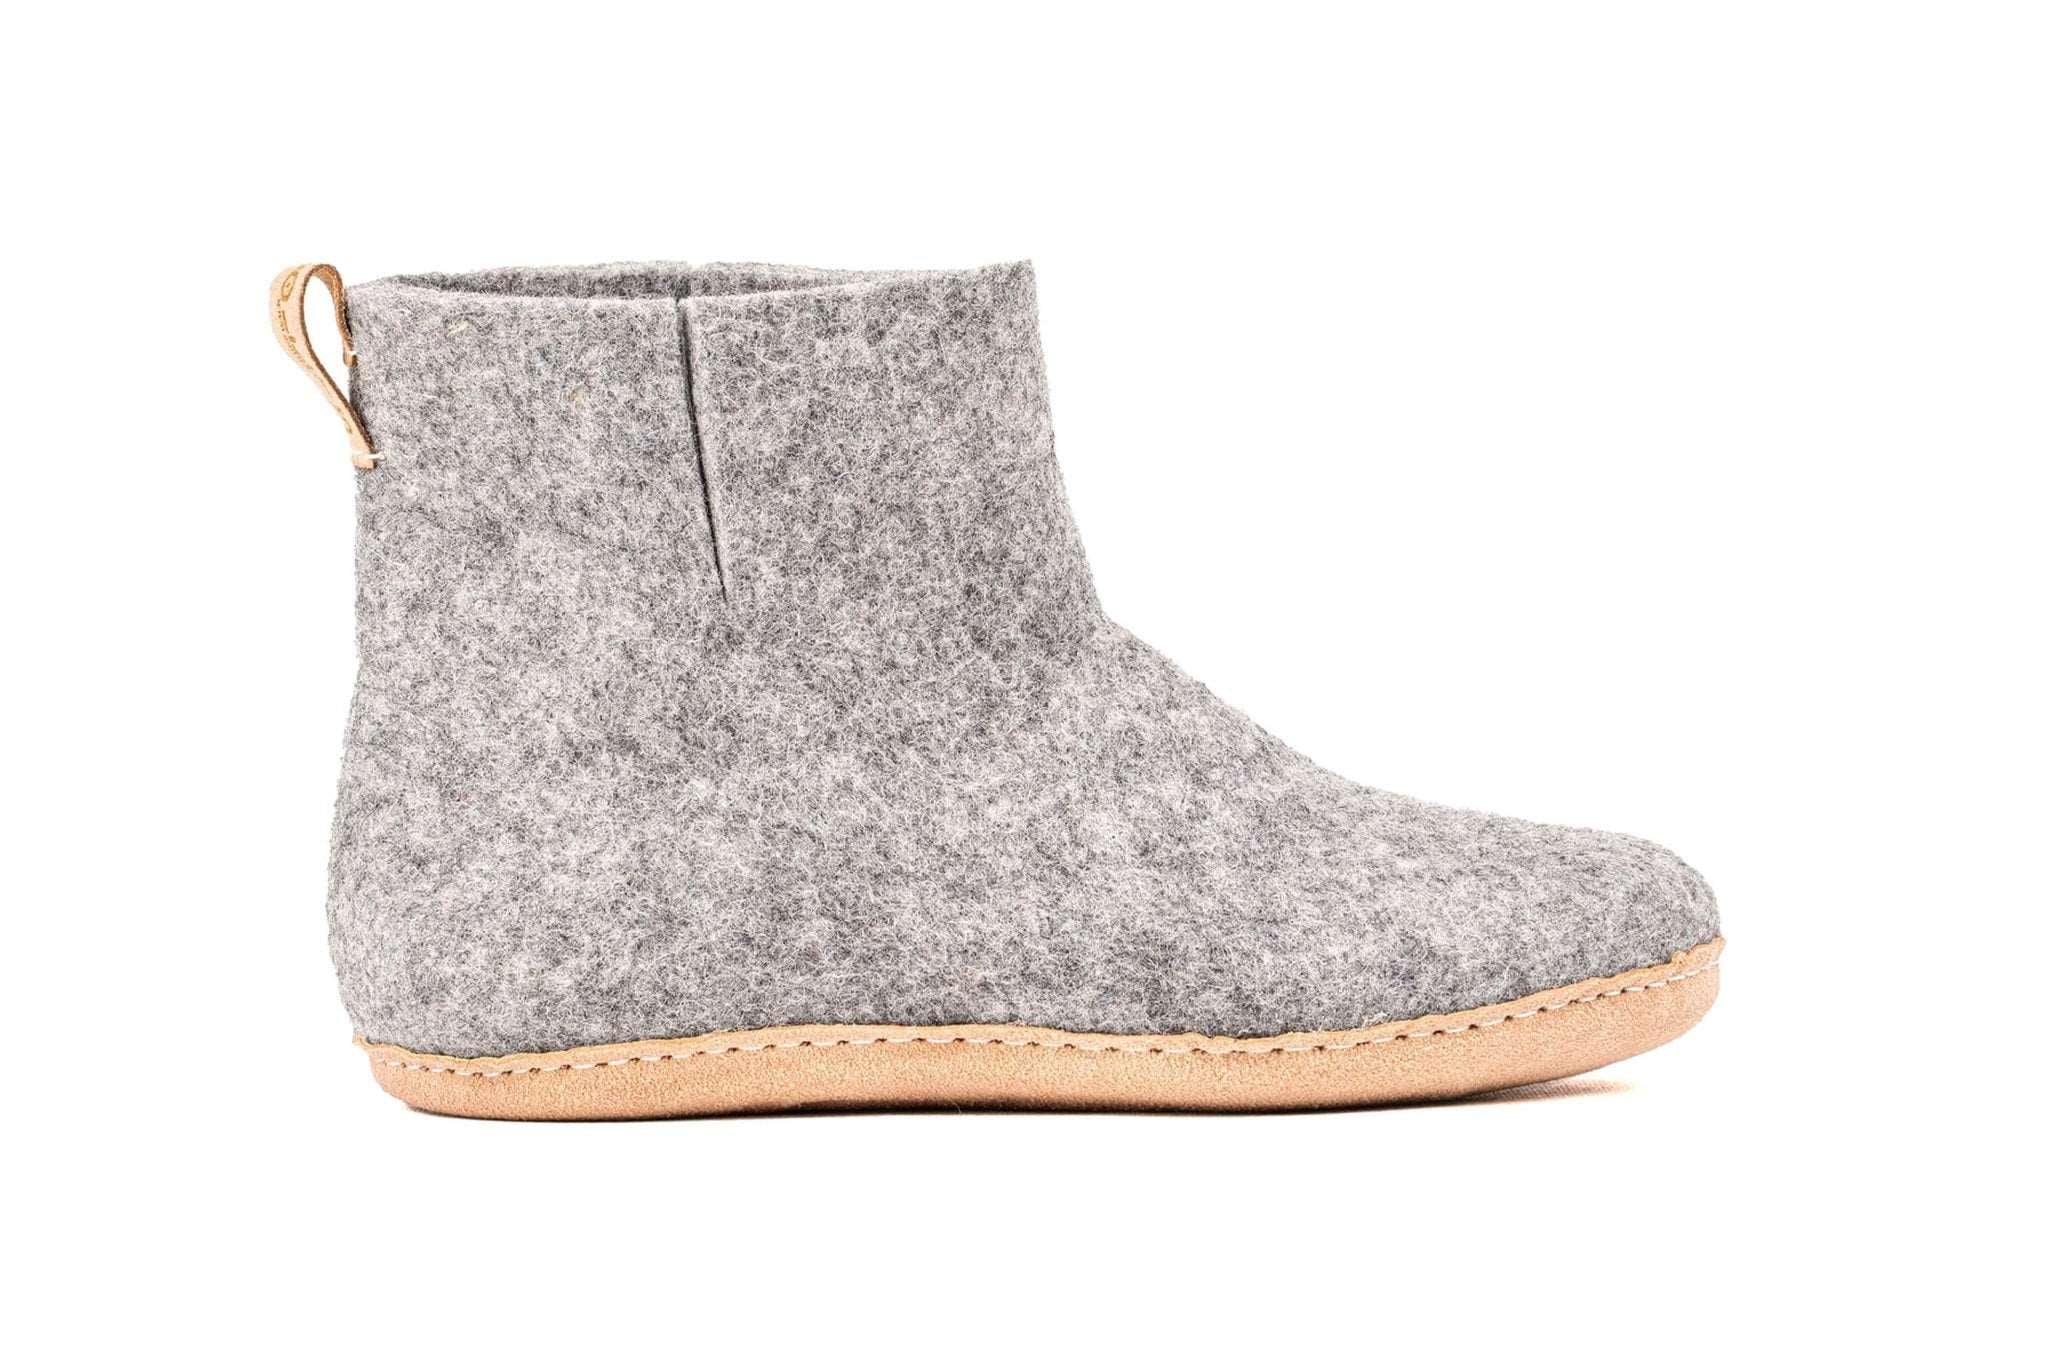 Indoor Boots With Leather Sole - Natural Grey - Woollyes